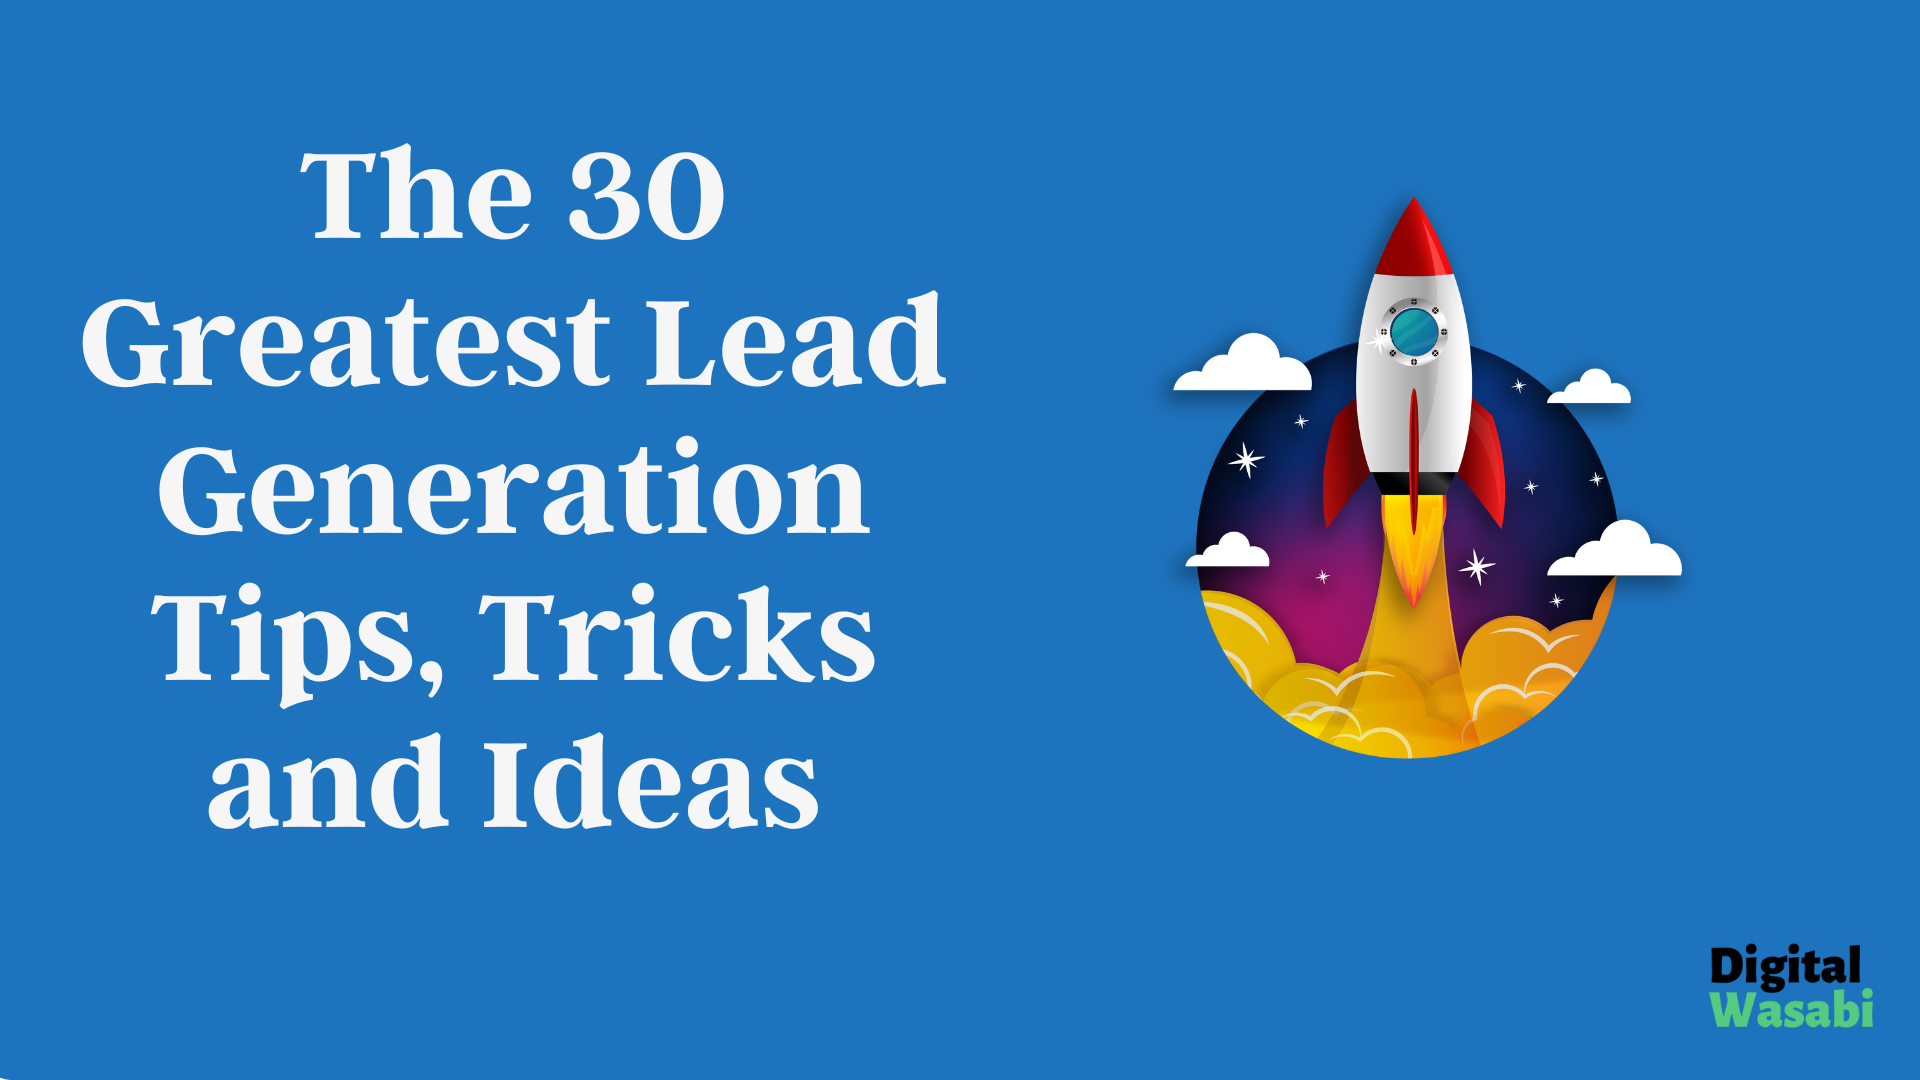 The 30 Greatest Lead generation tips, tricks, and ideas